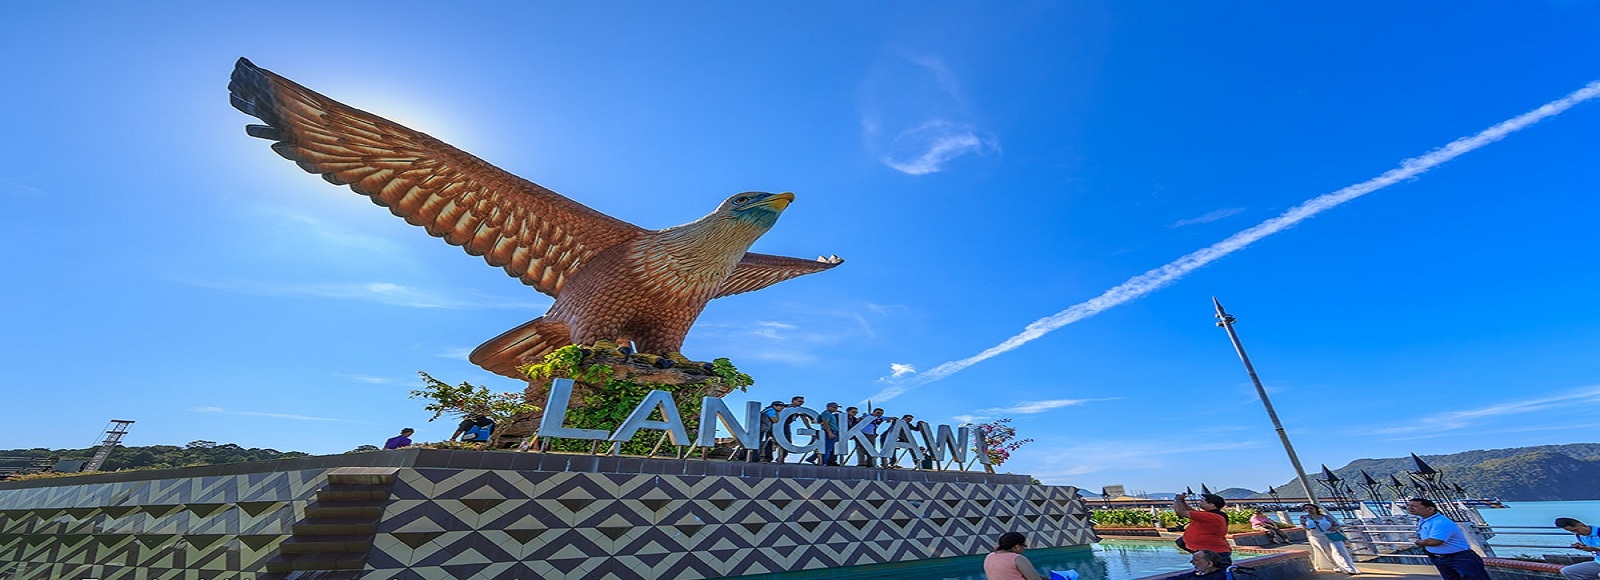 Transfer Offers in Langkawi  Island. Low Cost Transfers in  Langkawi  Island 